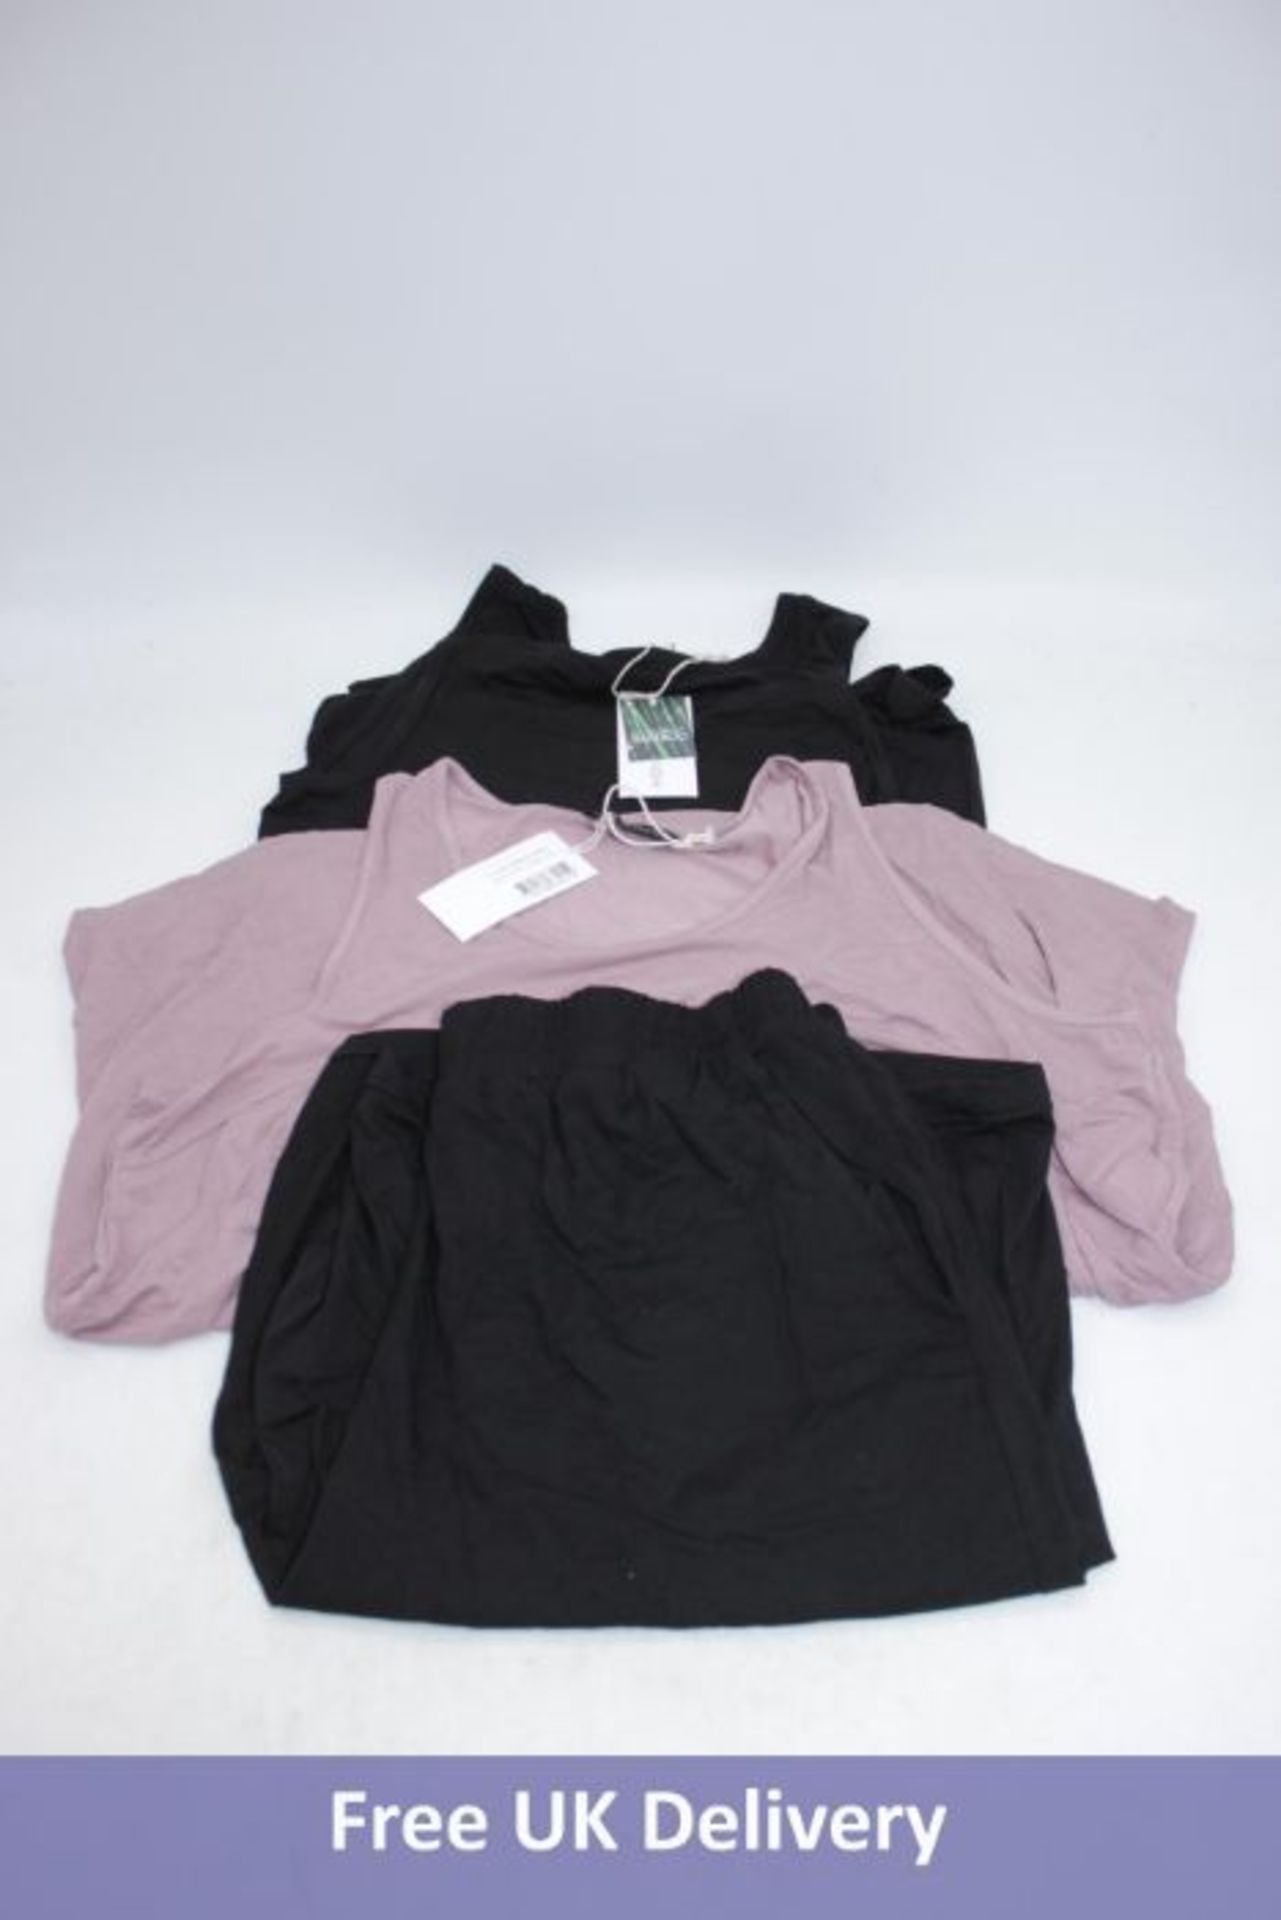 Three Items Of Movesgood Clothing to include 1x Tunic Dusty Pink, Size L-XL, 1x Sam Shorts Black, Si